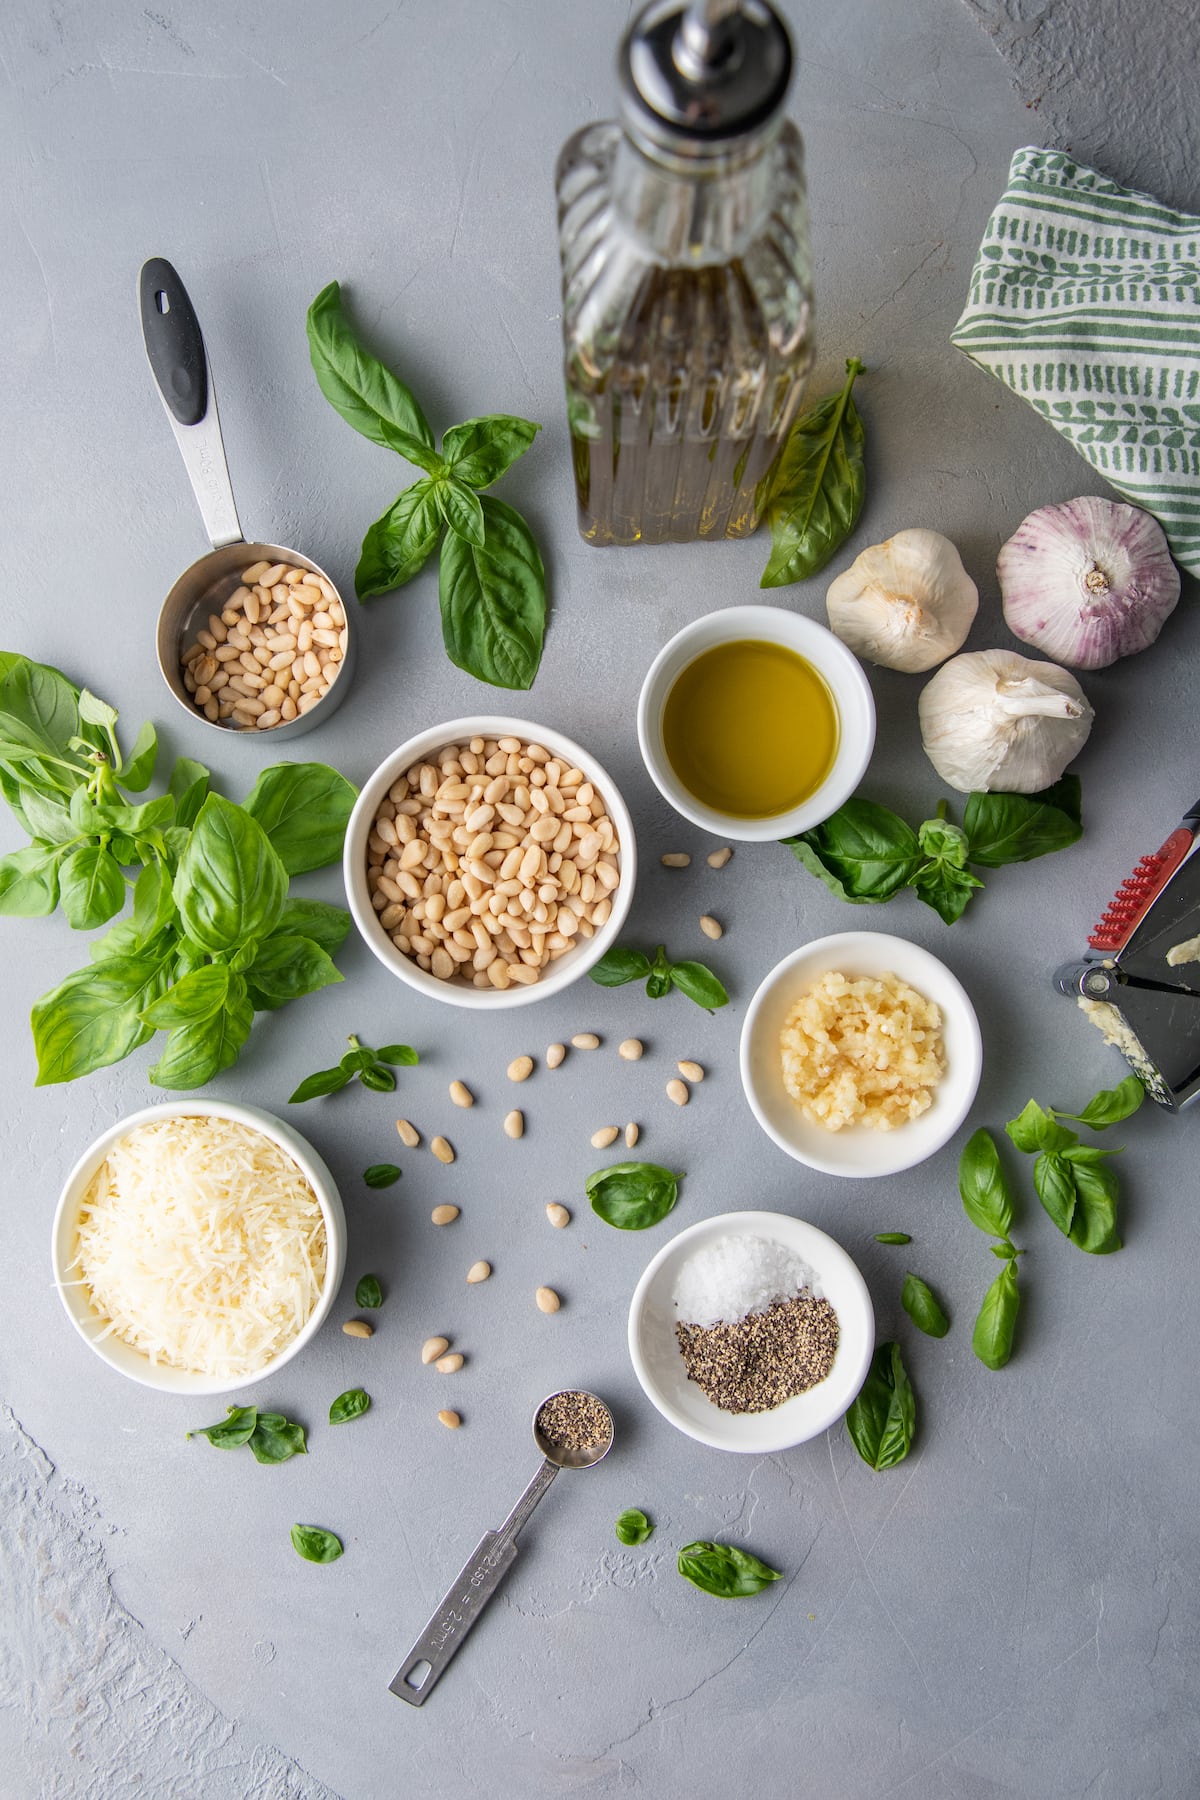 all of the ingredients you need to make fresh pesto like basil, garlic, parmesan cheese, salt, pepper, pinenuts, and olive oil in seperate prep dishes